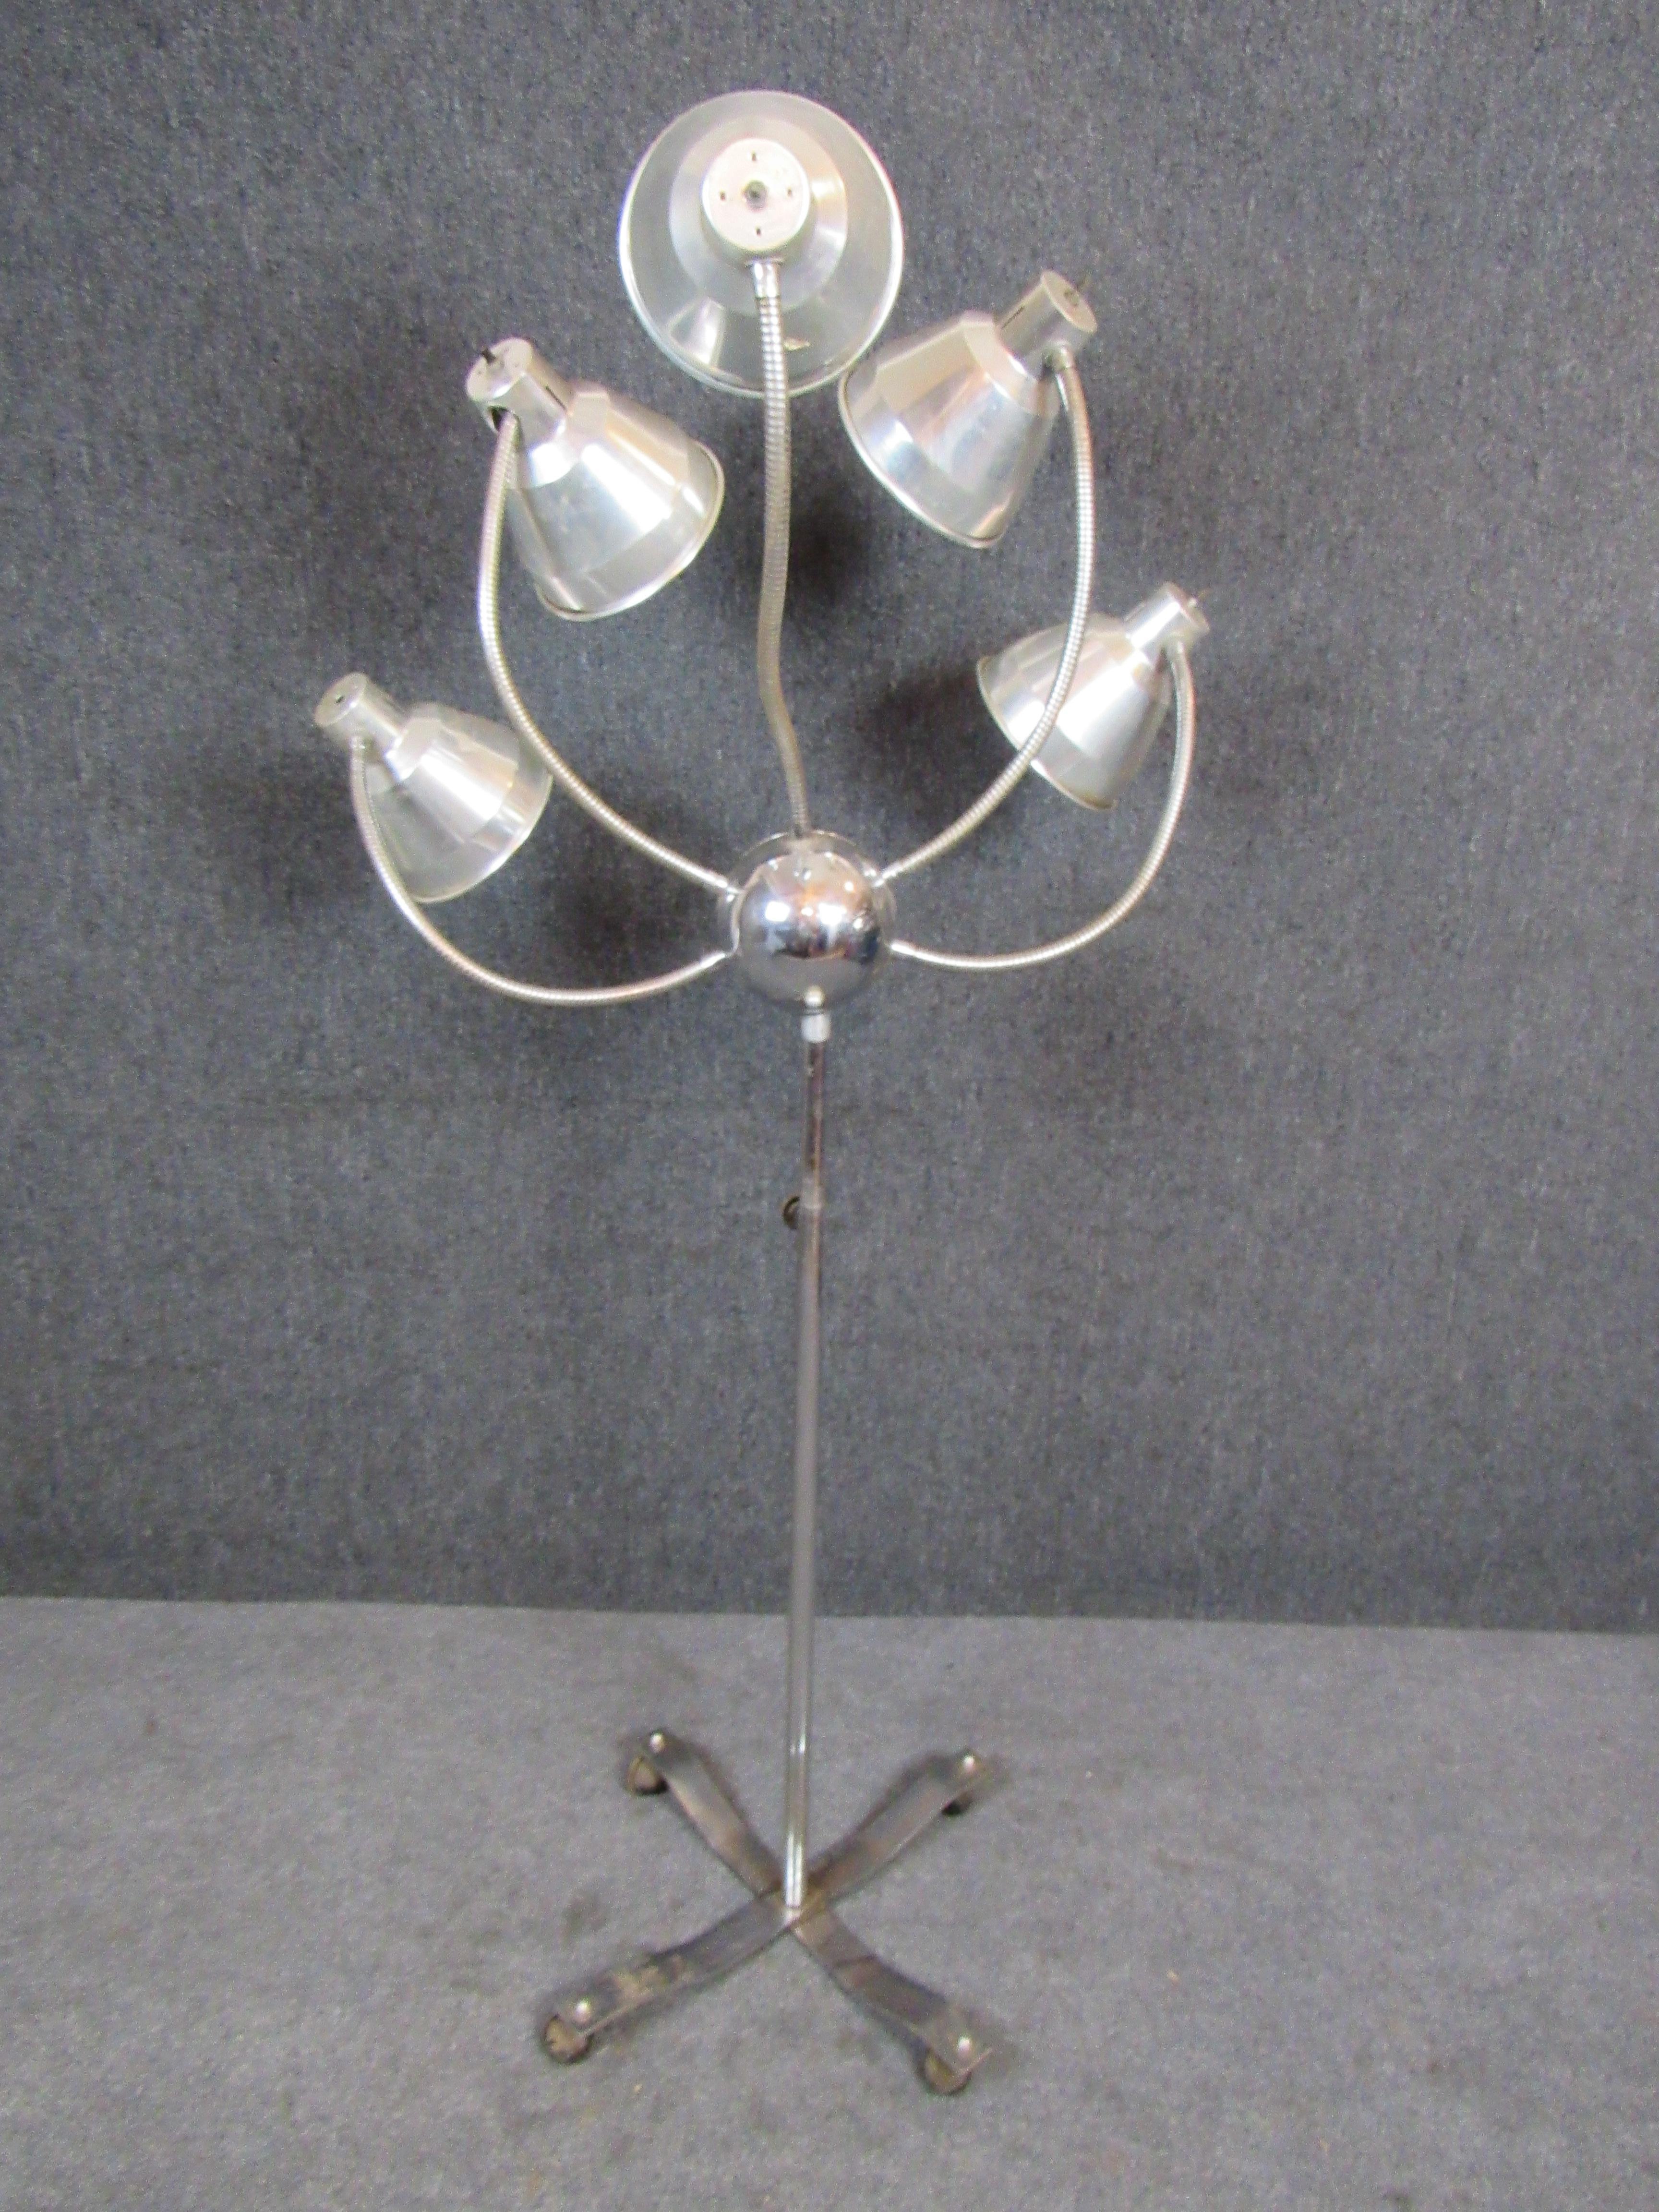 Funky Five-Headed Gooseneck Lamp In Fair Condition For Sale In Brooklyn, NY